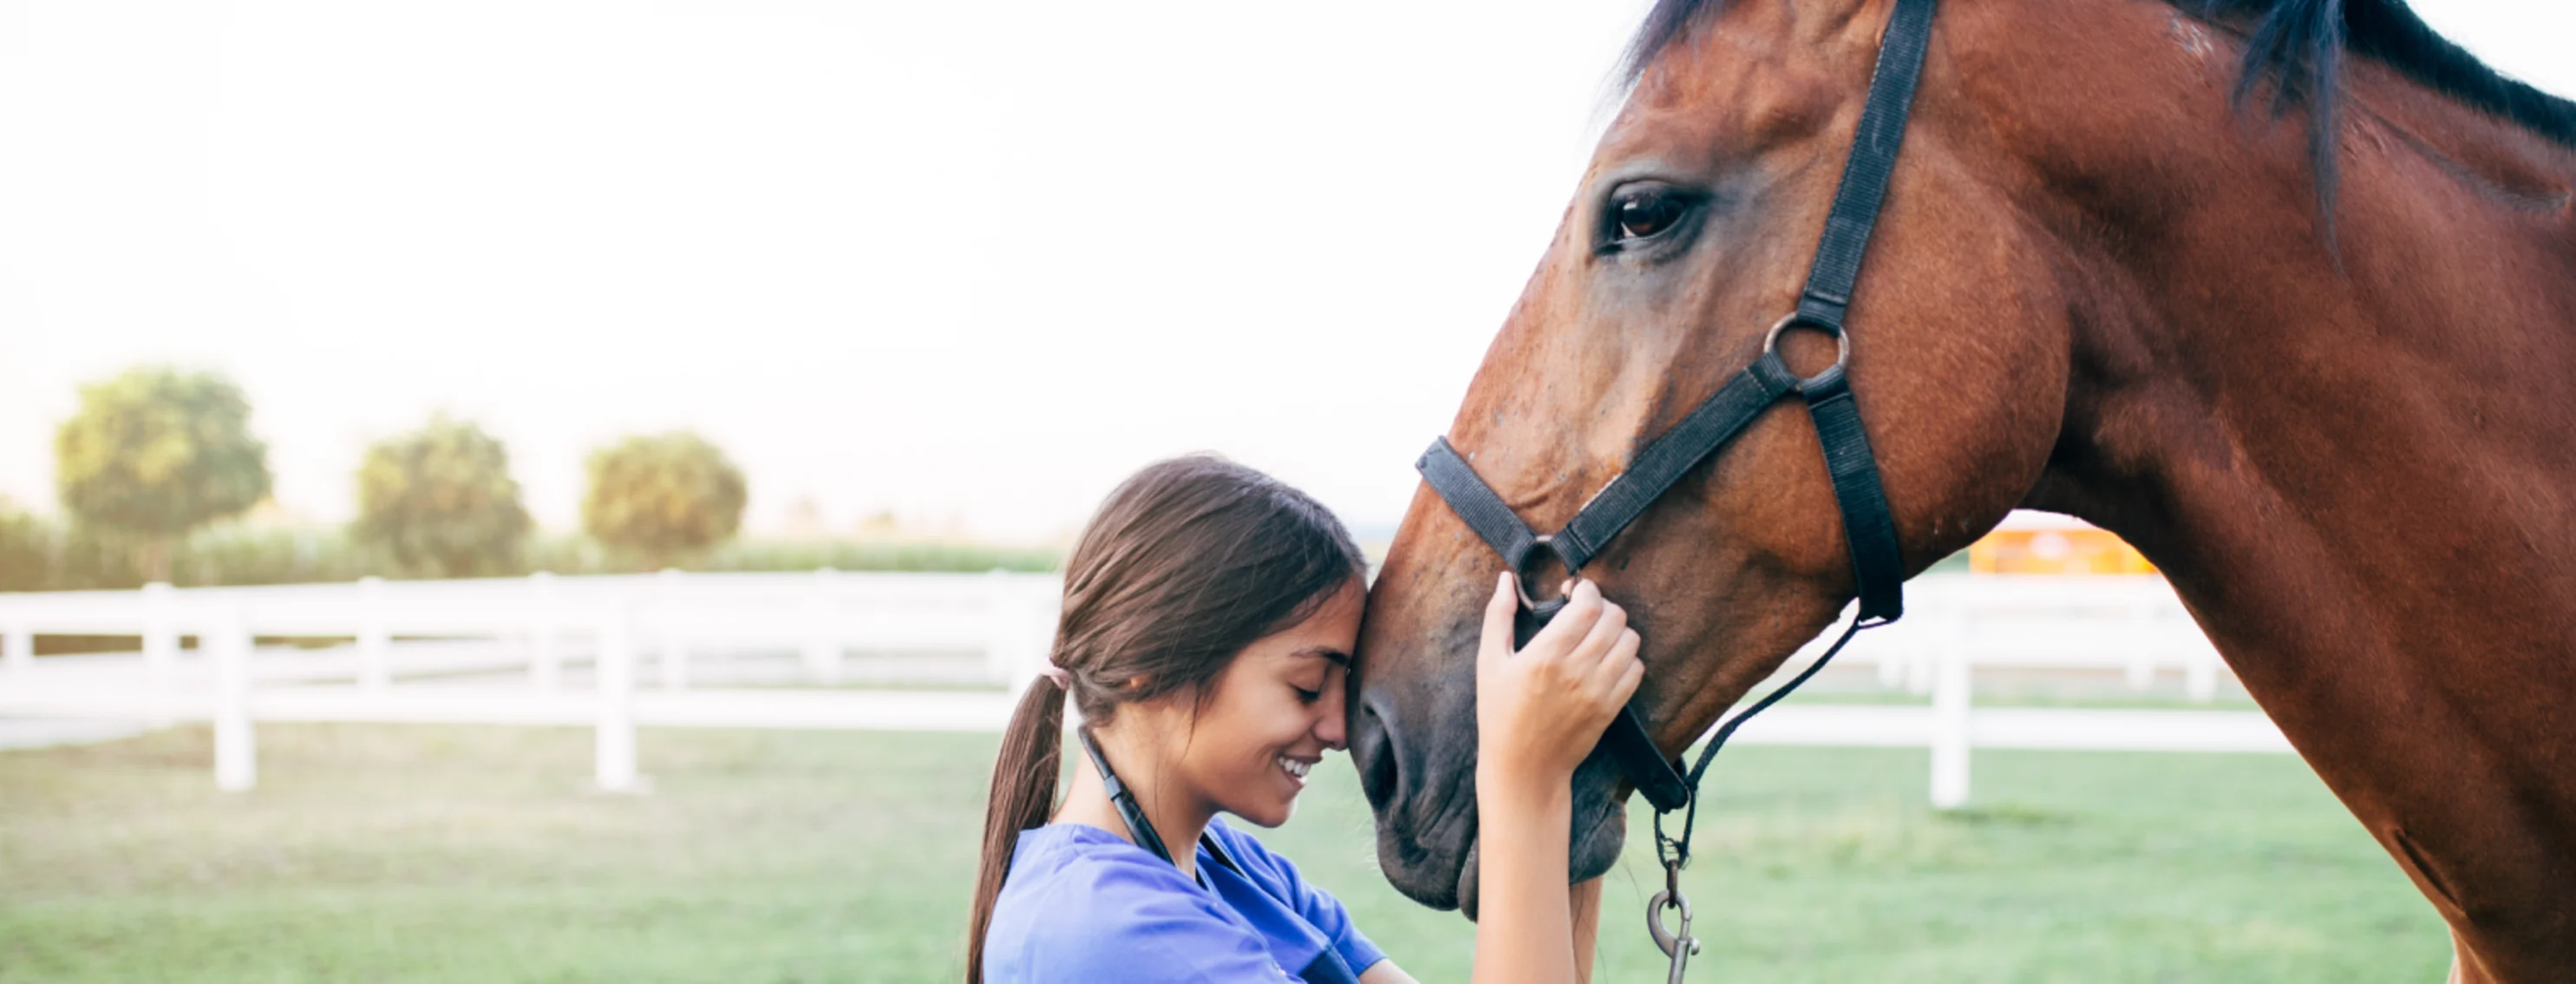 Veterinarian with horse taking care of him outside